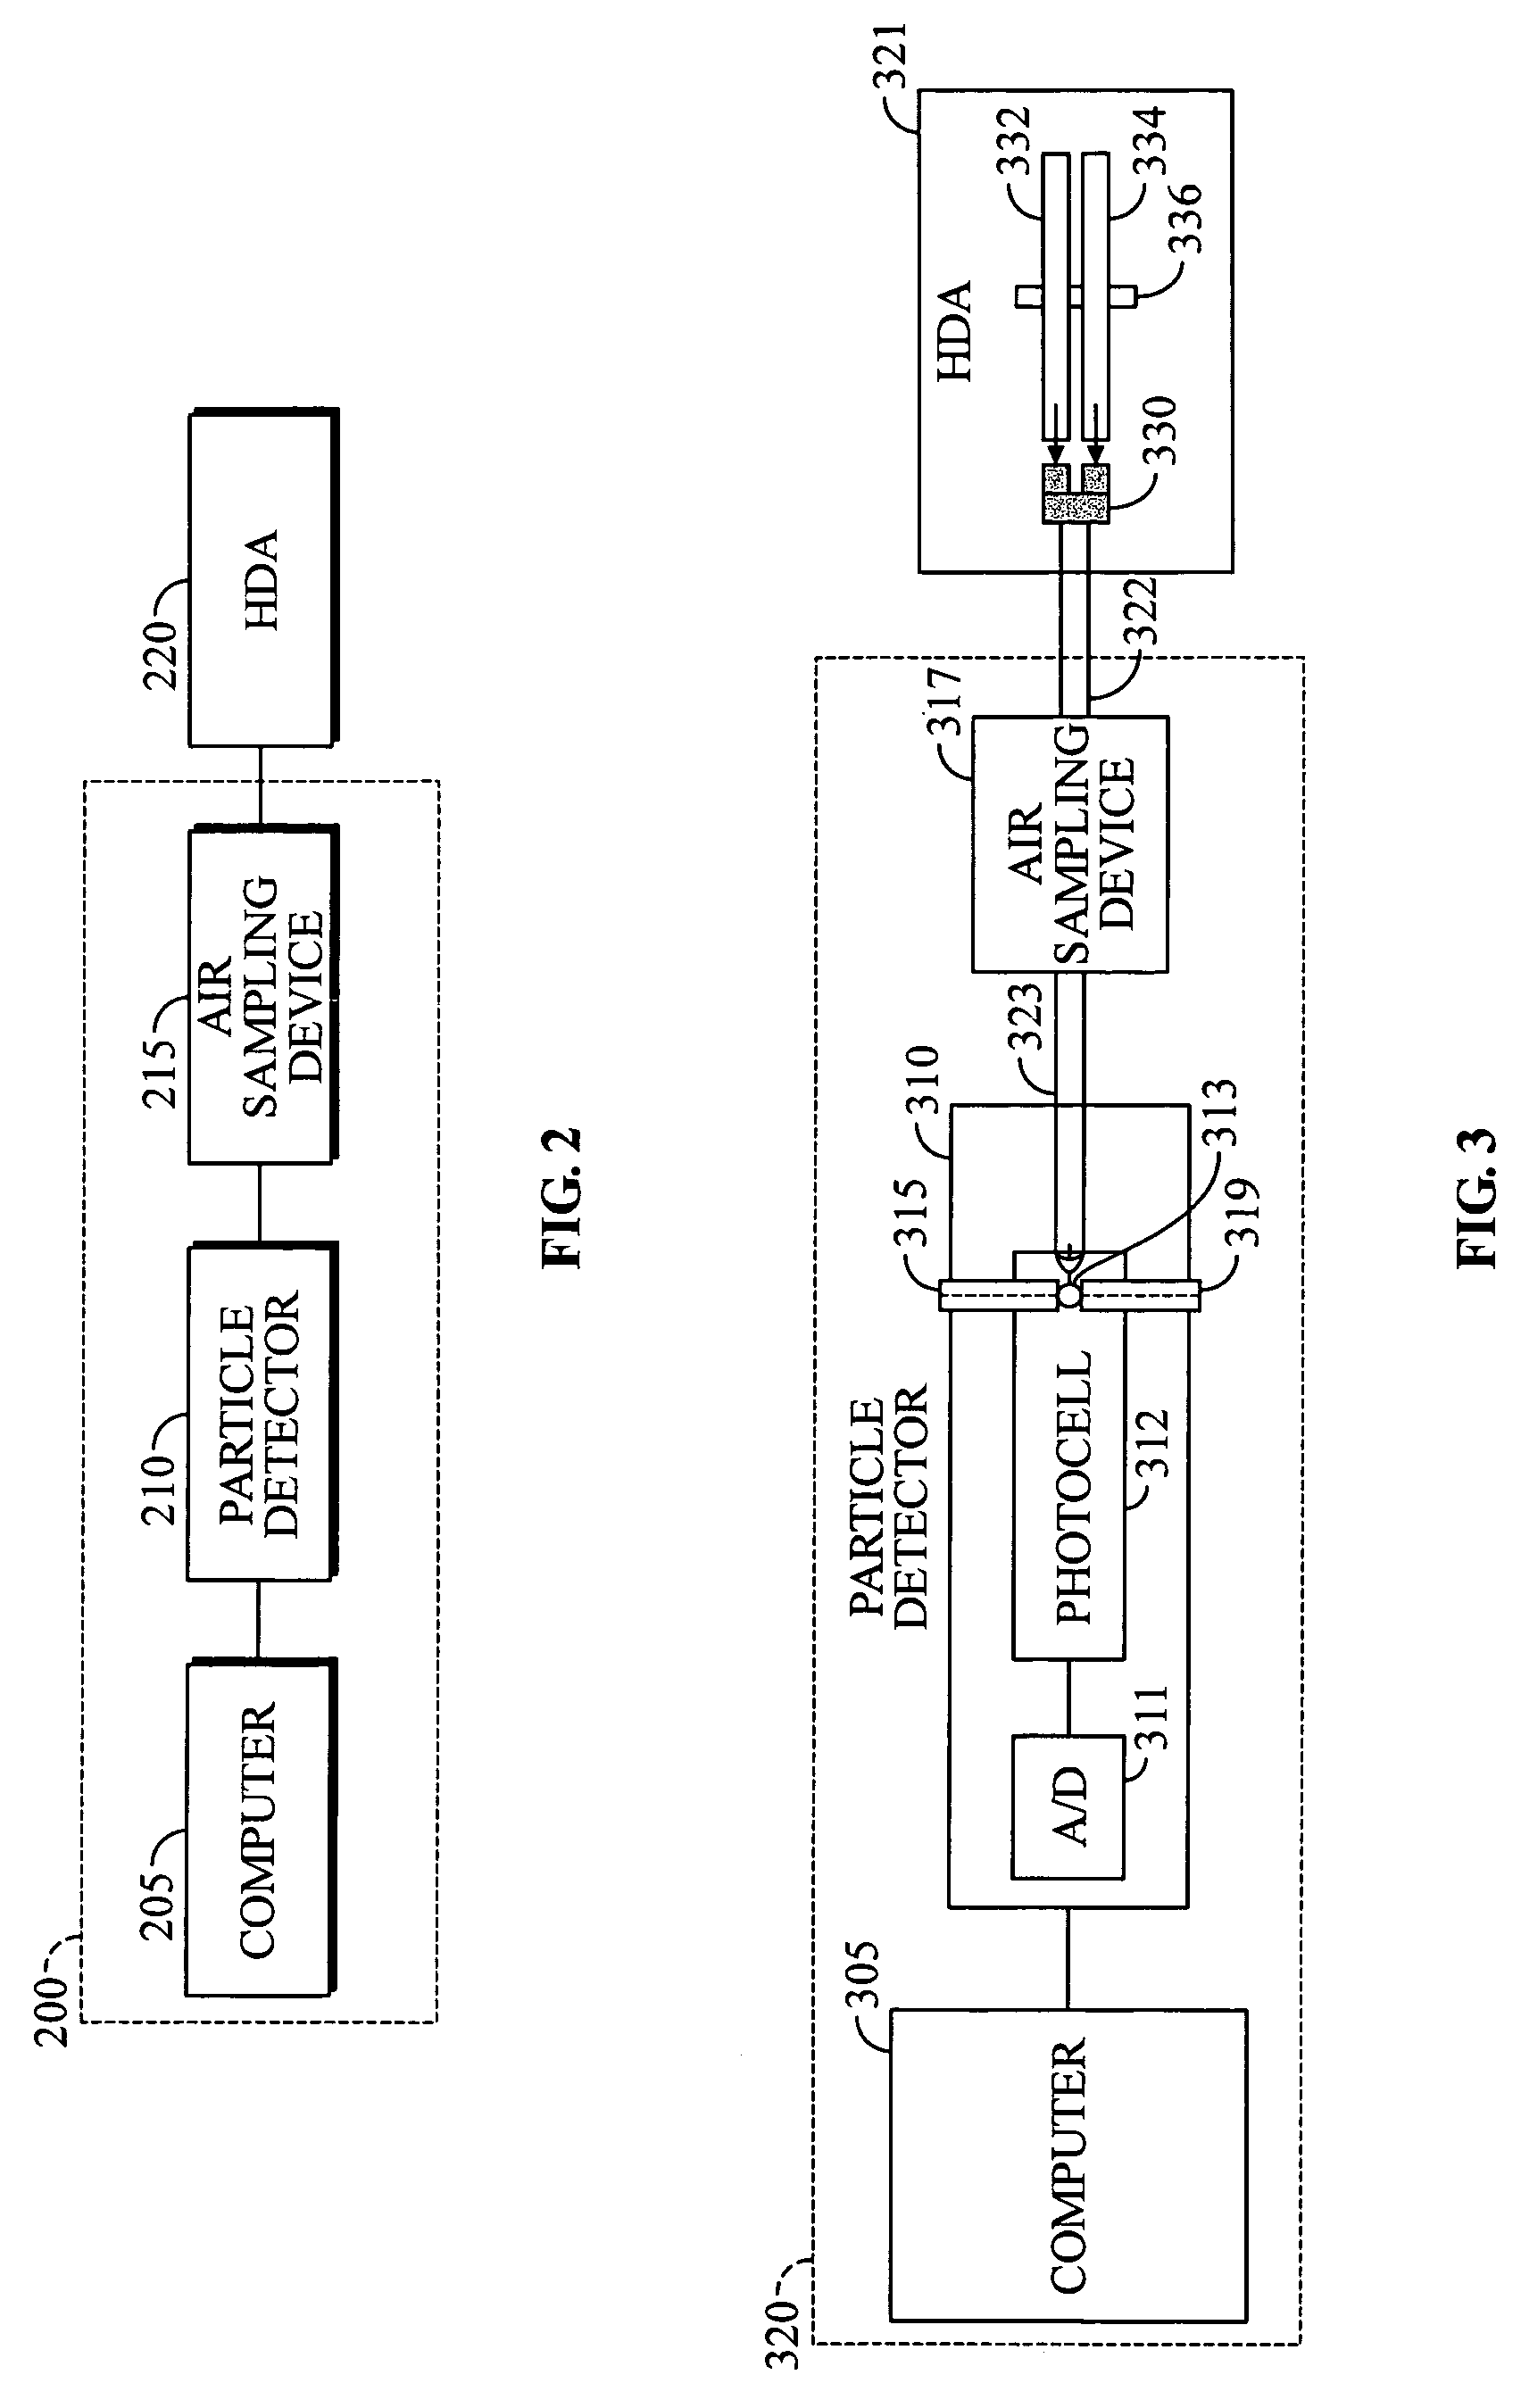 System and method for particle monitoring for a head disk assembly to detect a head disk interface event